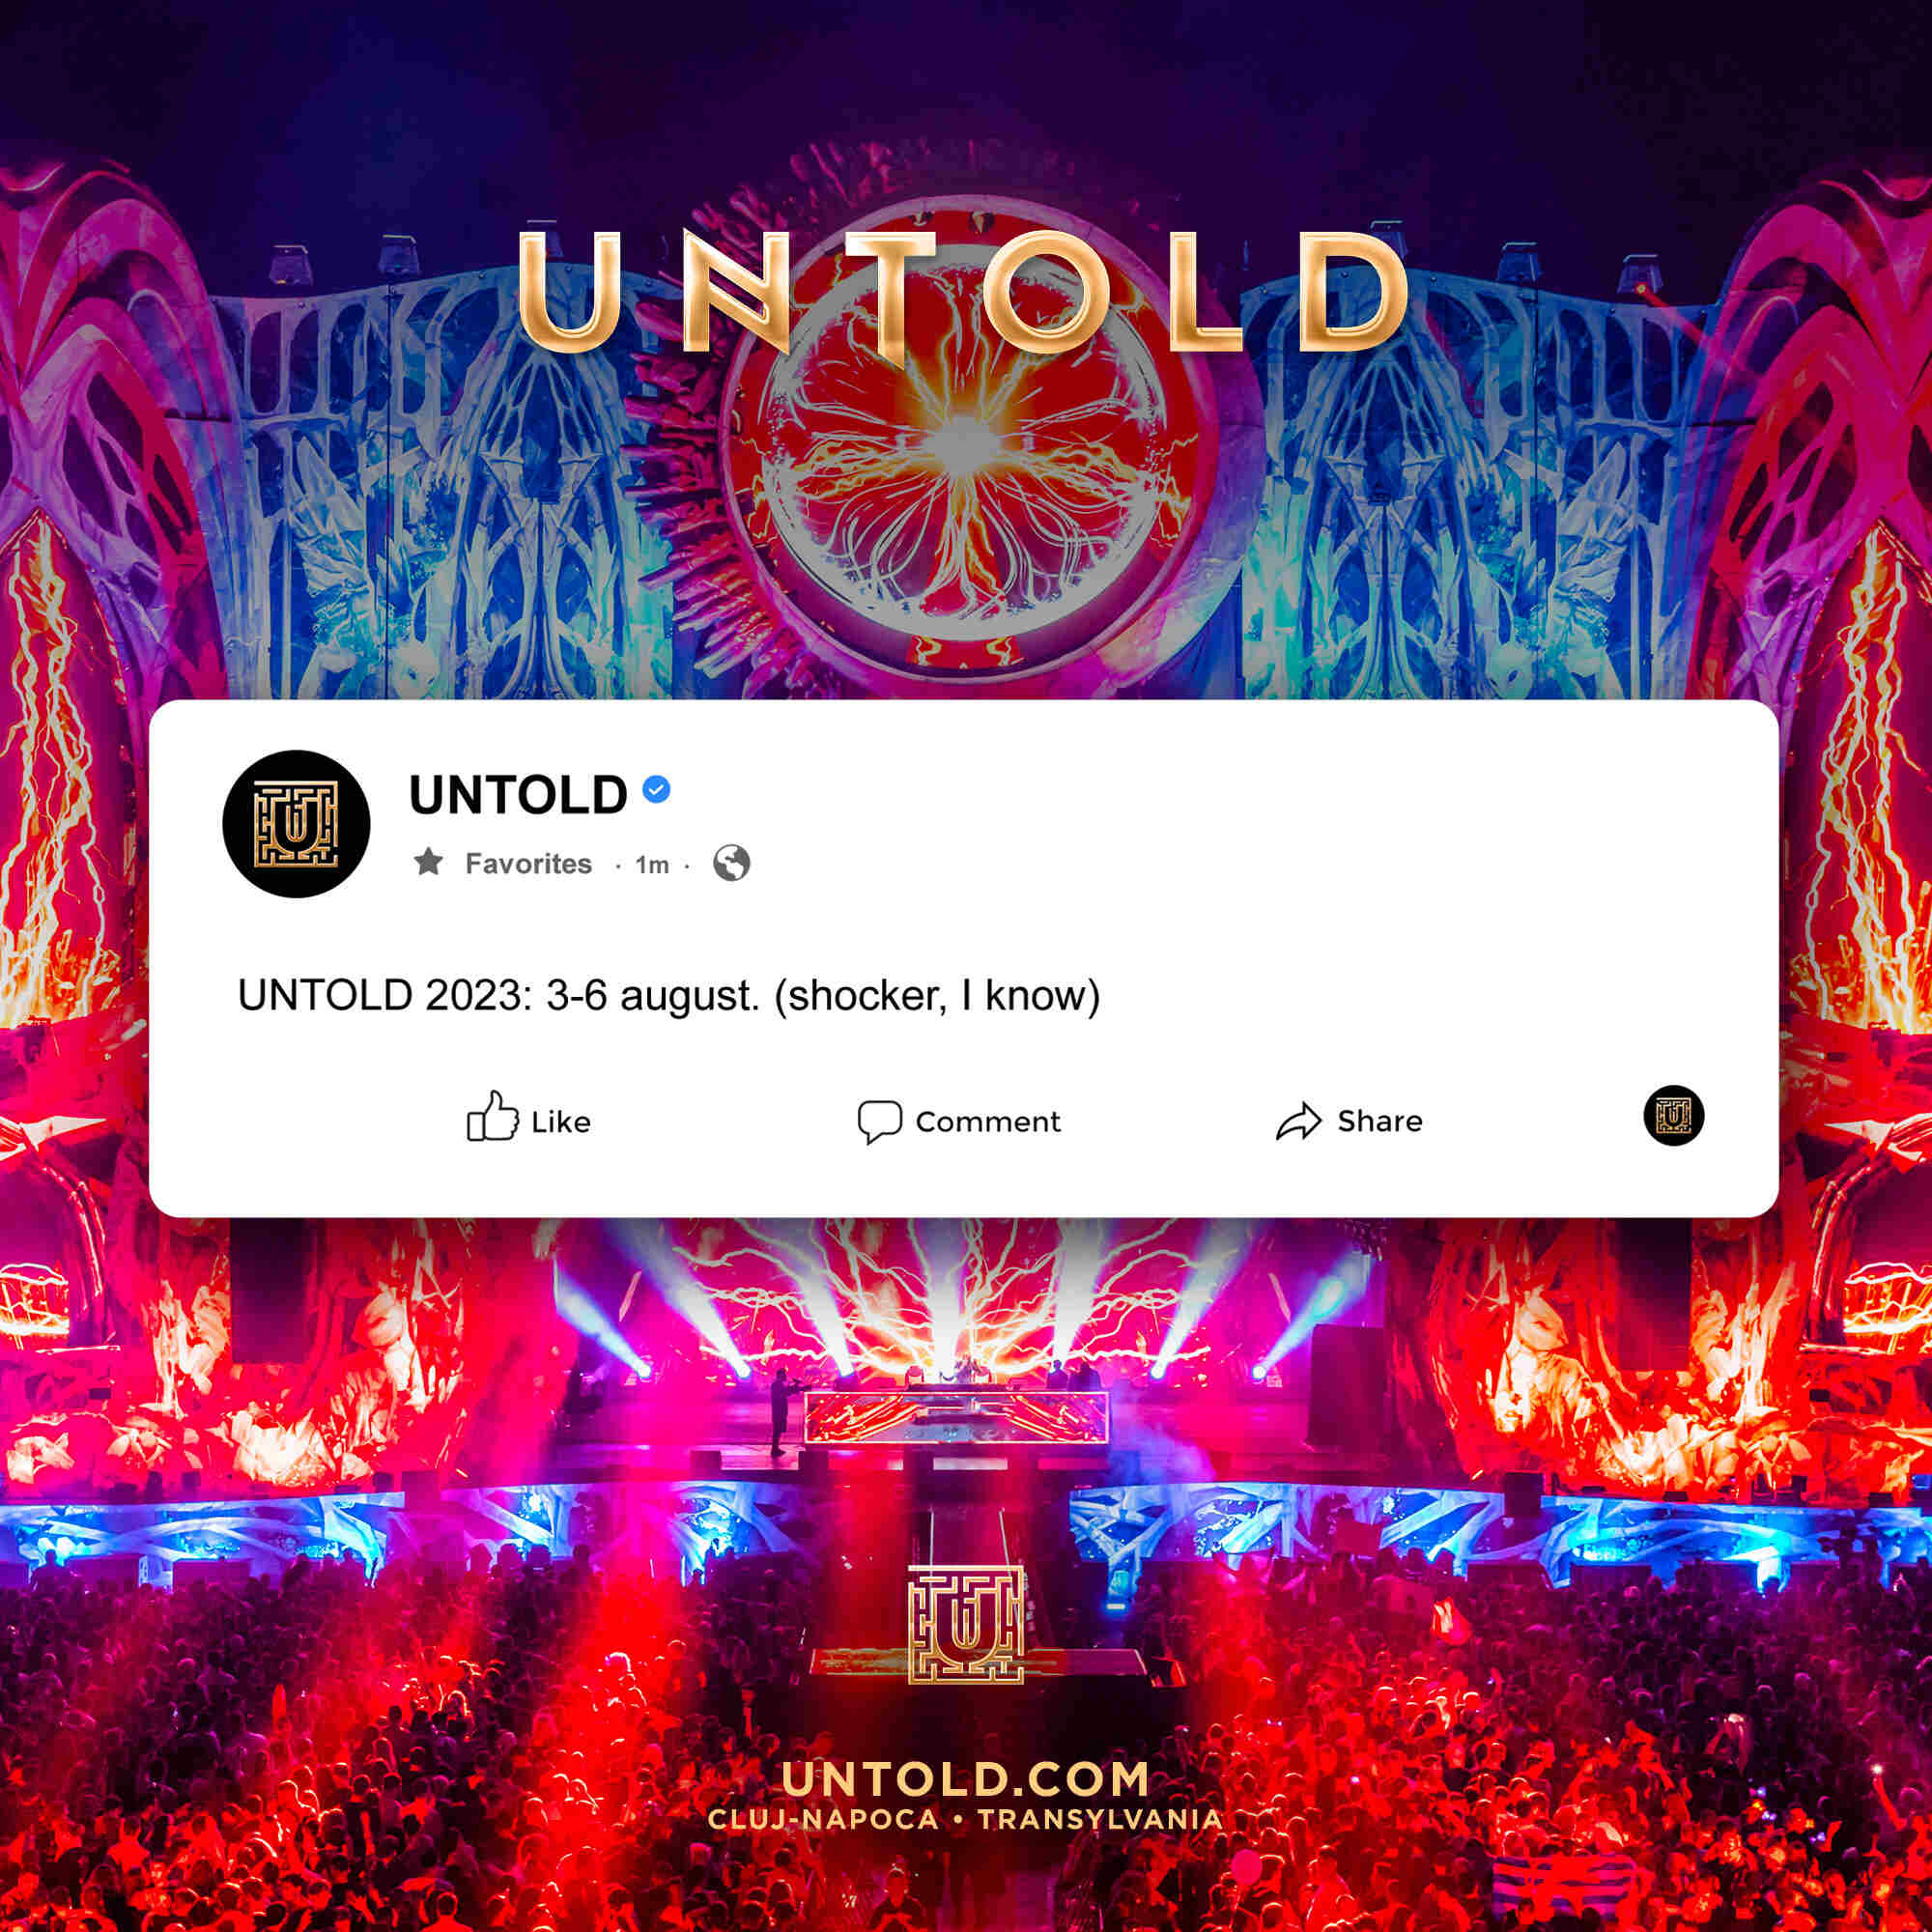 GET READY FOR UNTOLD 2023